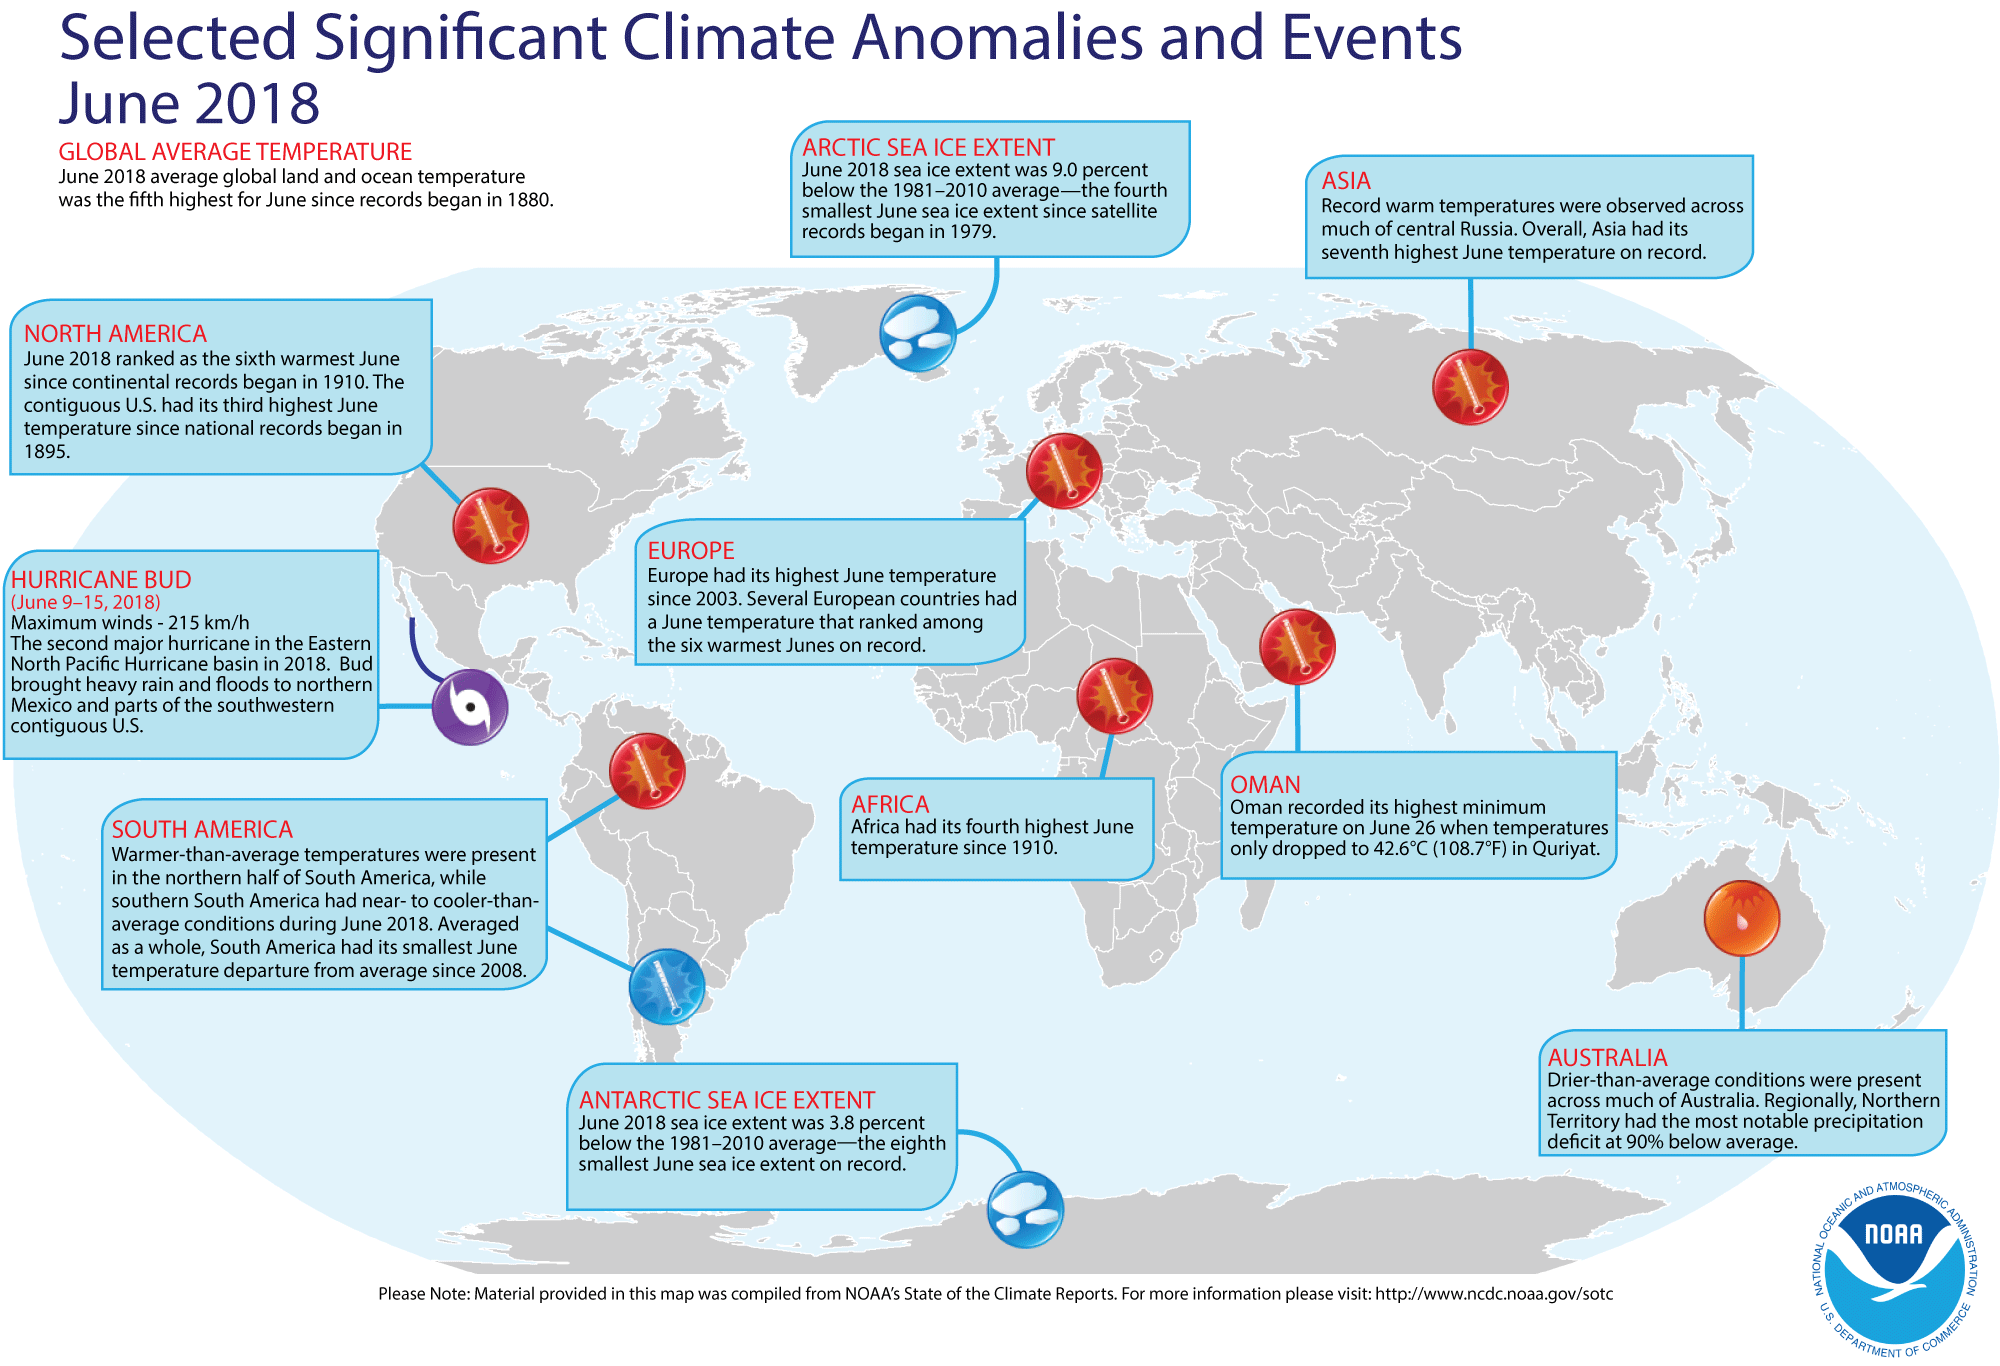 An annotated map of the world showing notable climate events that occurred in June 2018. For details, see the bulleted list below in our story and on the Web at http://www.ncdc.noaa.gov/sotc/global/2018/06.